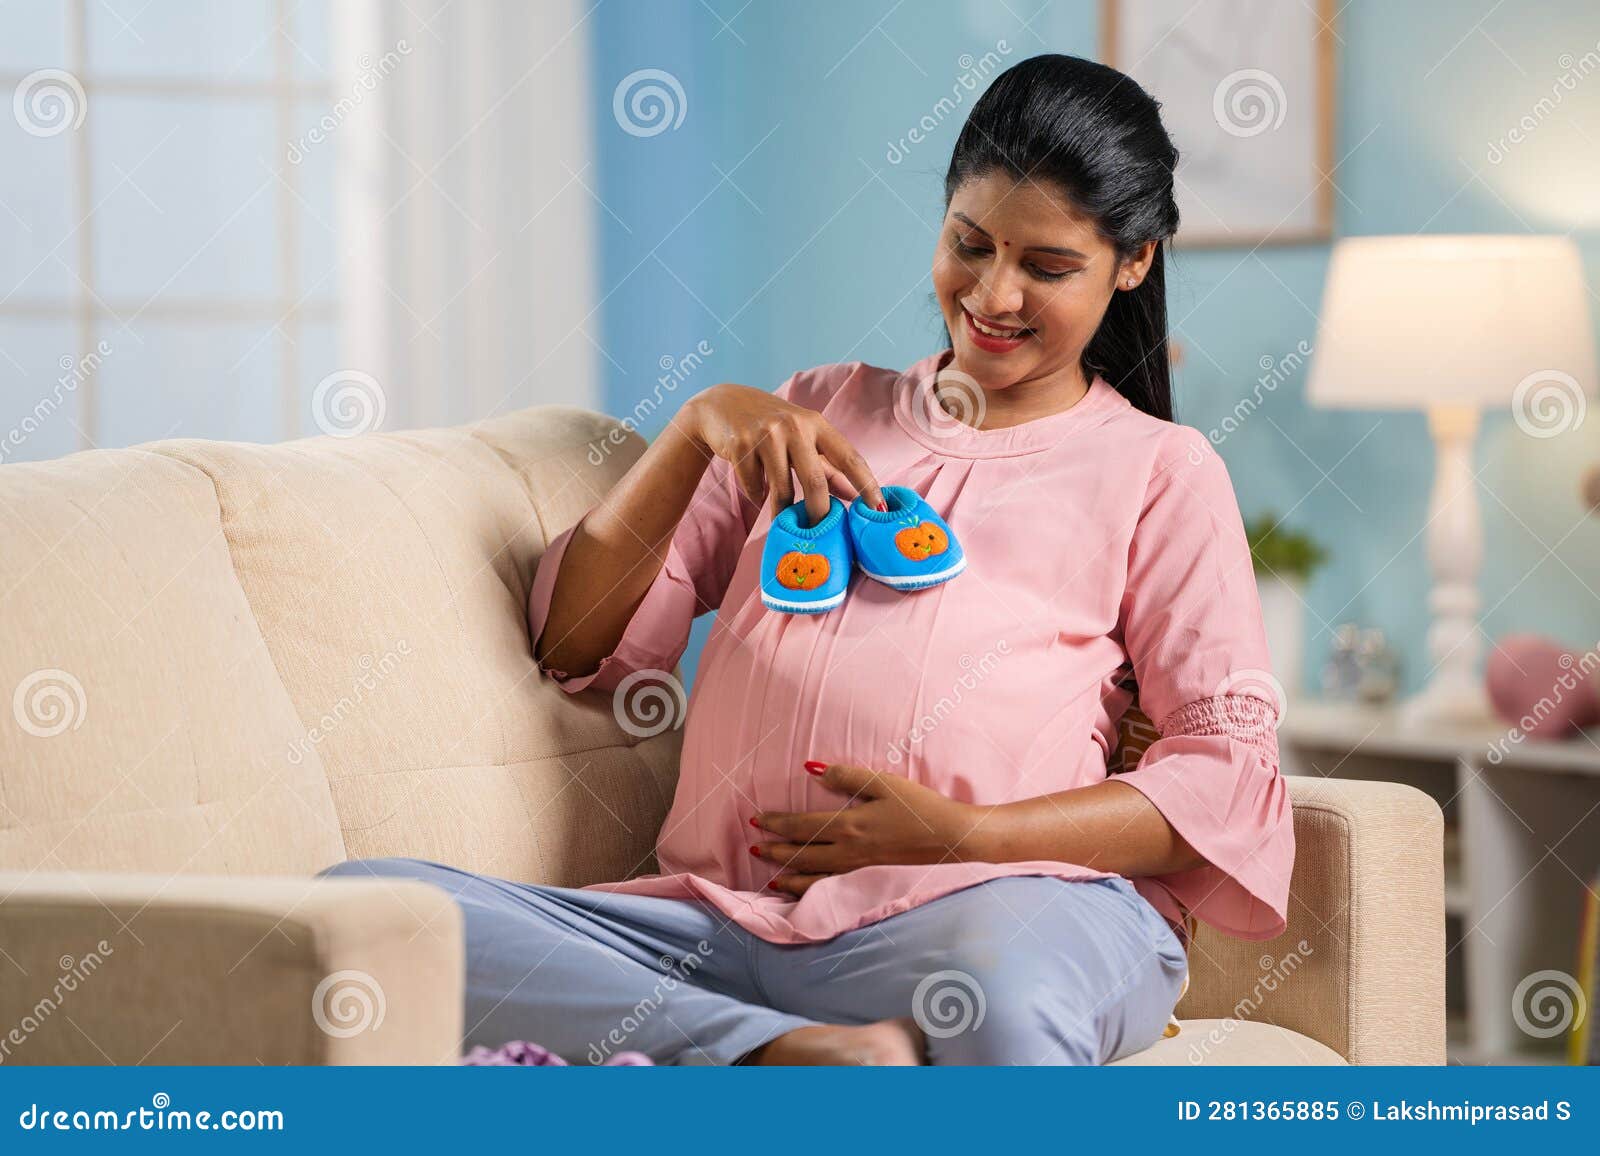 Indian pregnant woman, Concept for pregnancy.Indian woman in